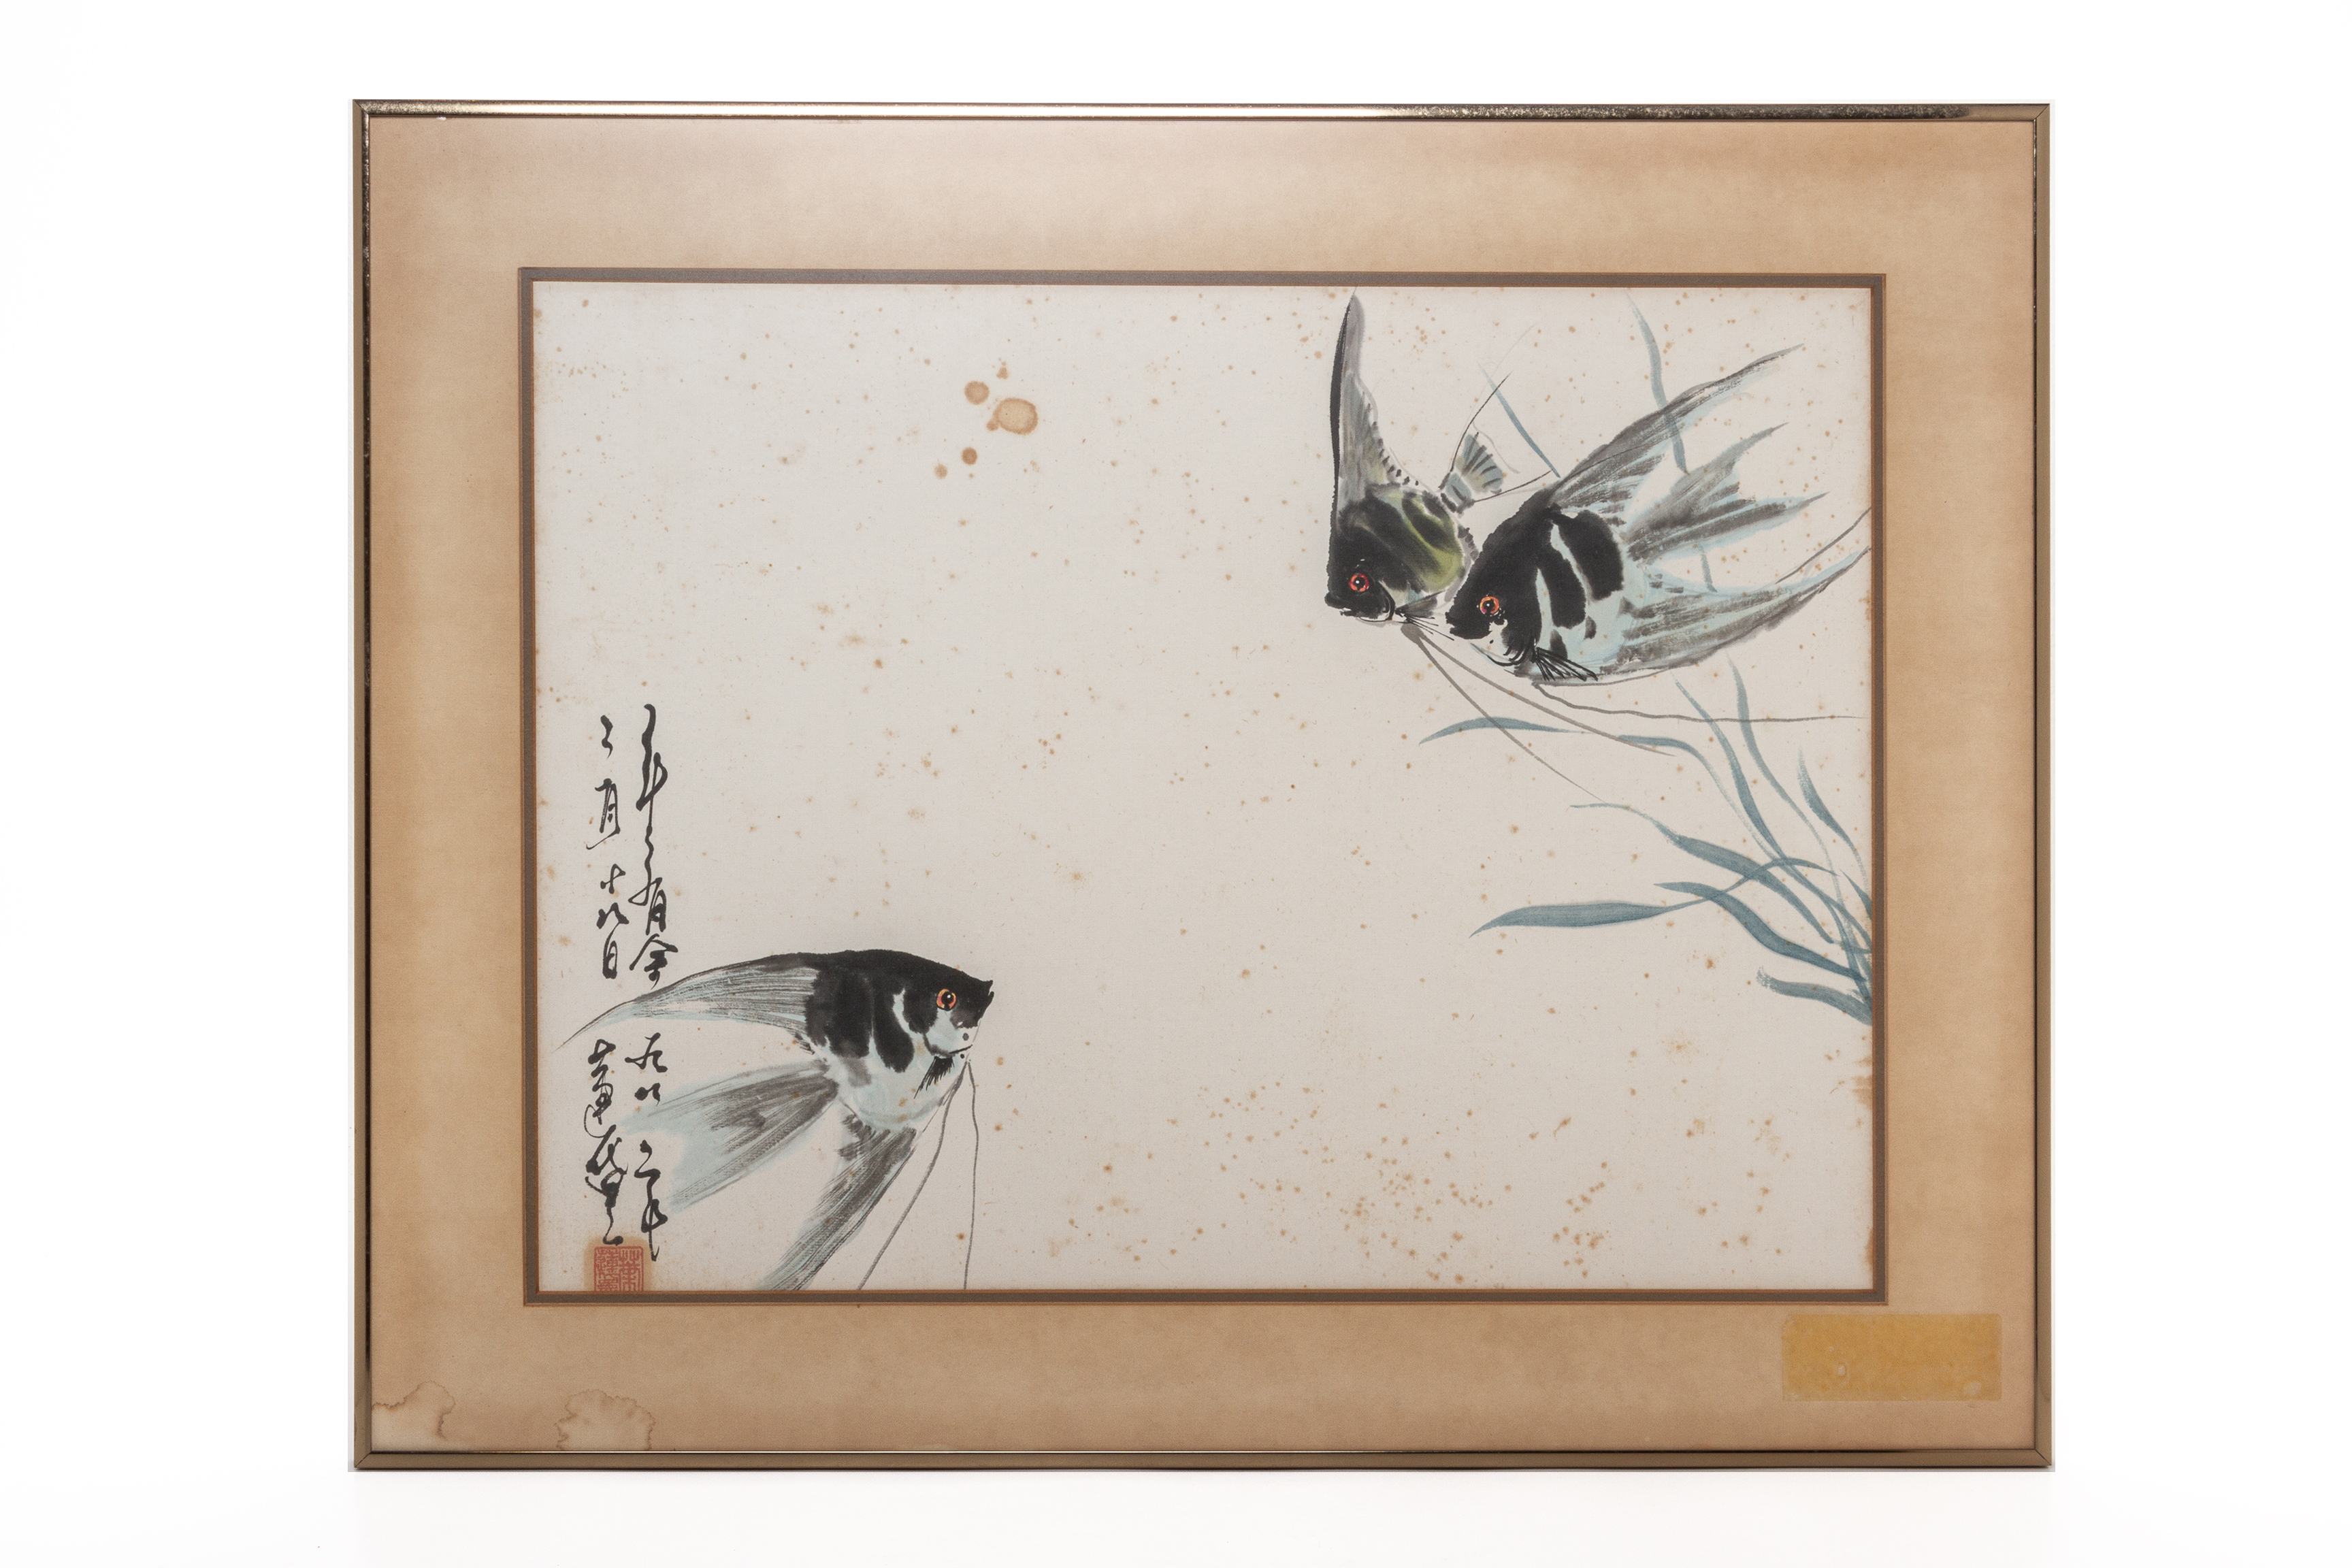 CHINESE SCHOOL, 20TH CENTURY - A STUDY OF ANGEL FISH